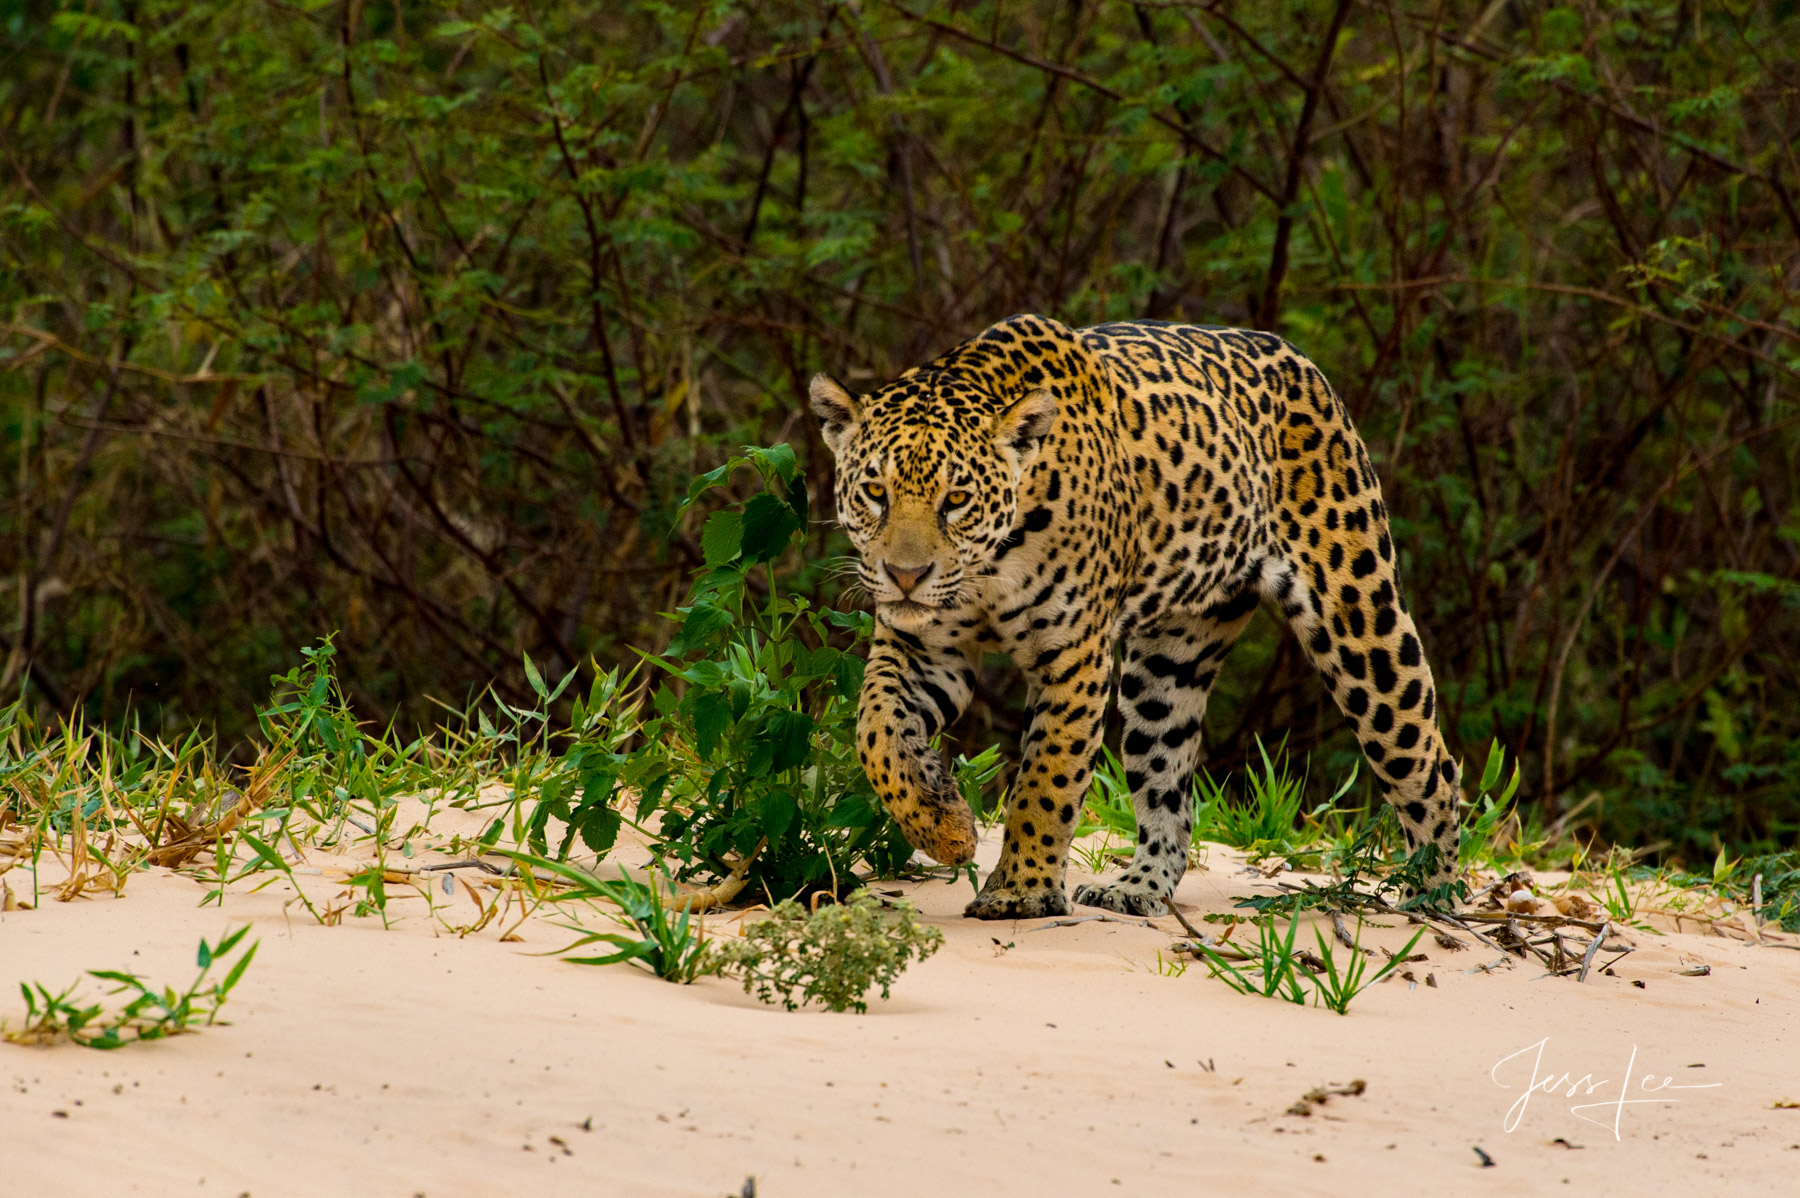 Fine art Jaguar Hunting on the beach print limited edition of 300 luxury prints by Jess Lee. All photographs copyright © Jess...